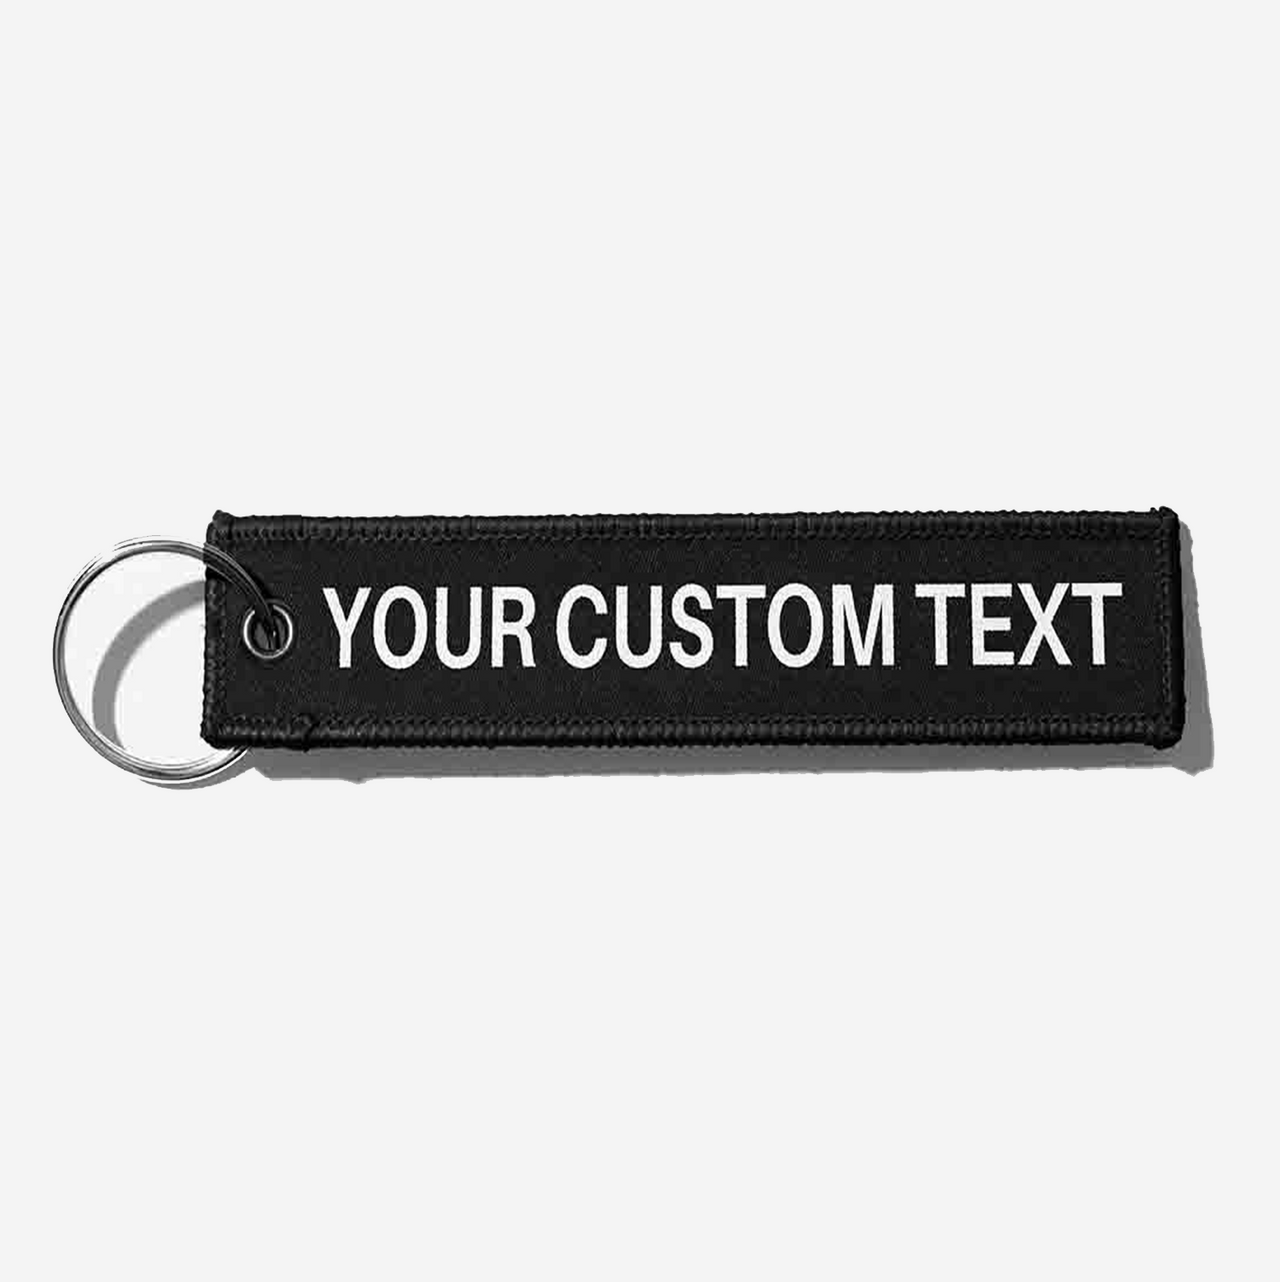 Your Custom Text Designed Key Chains